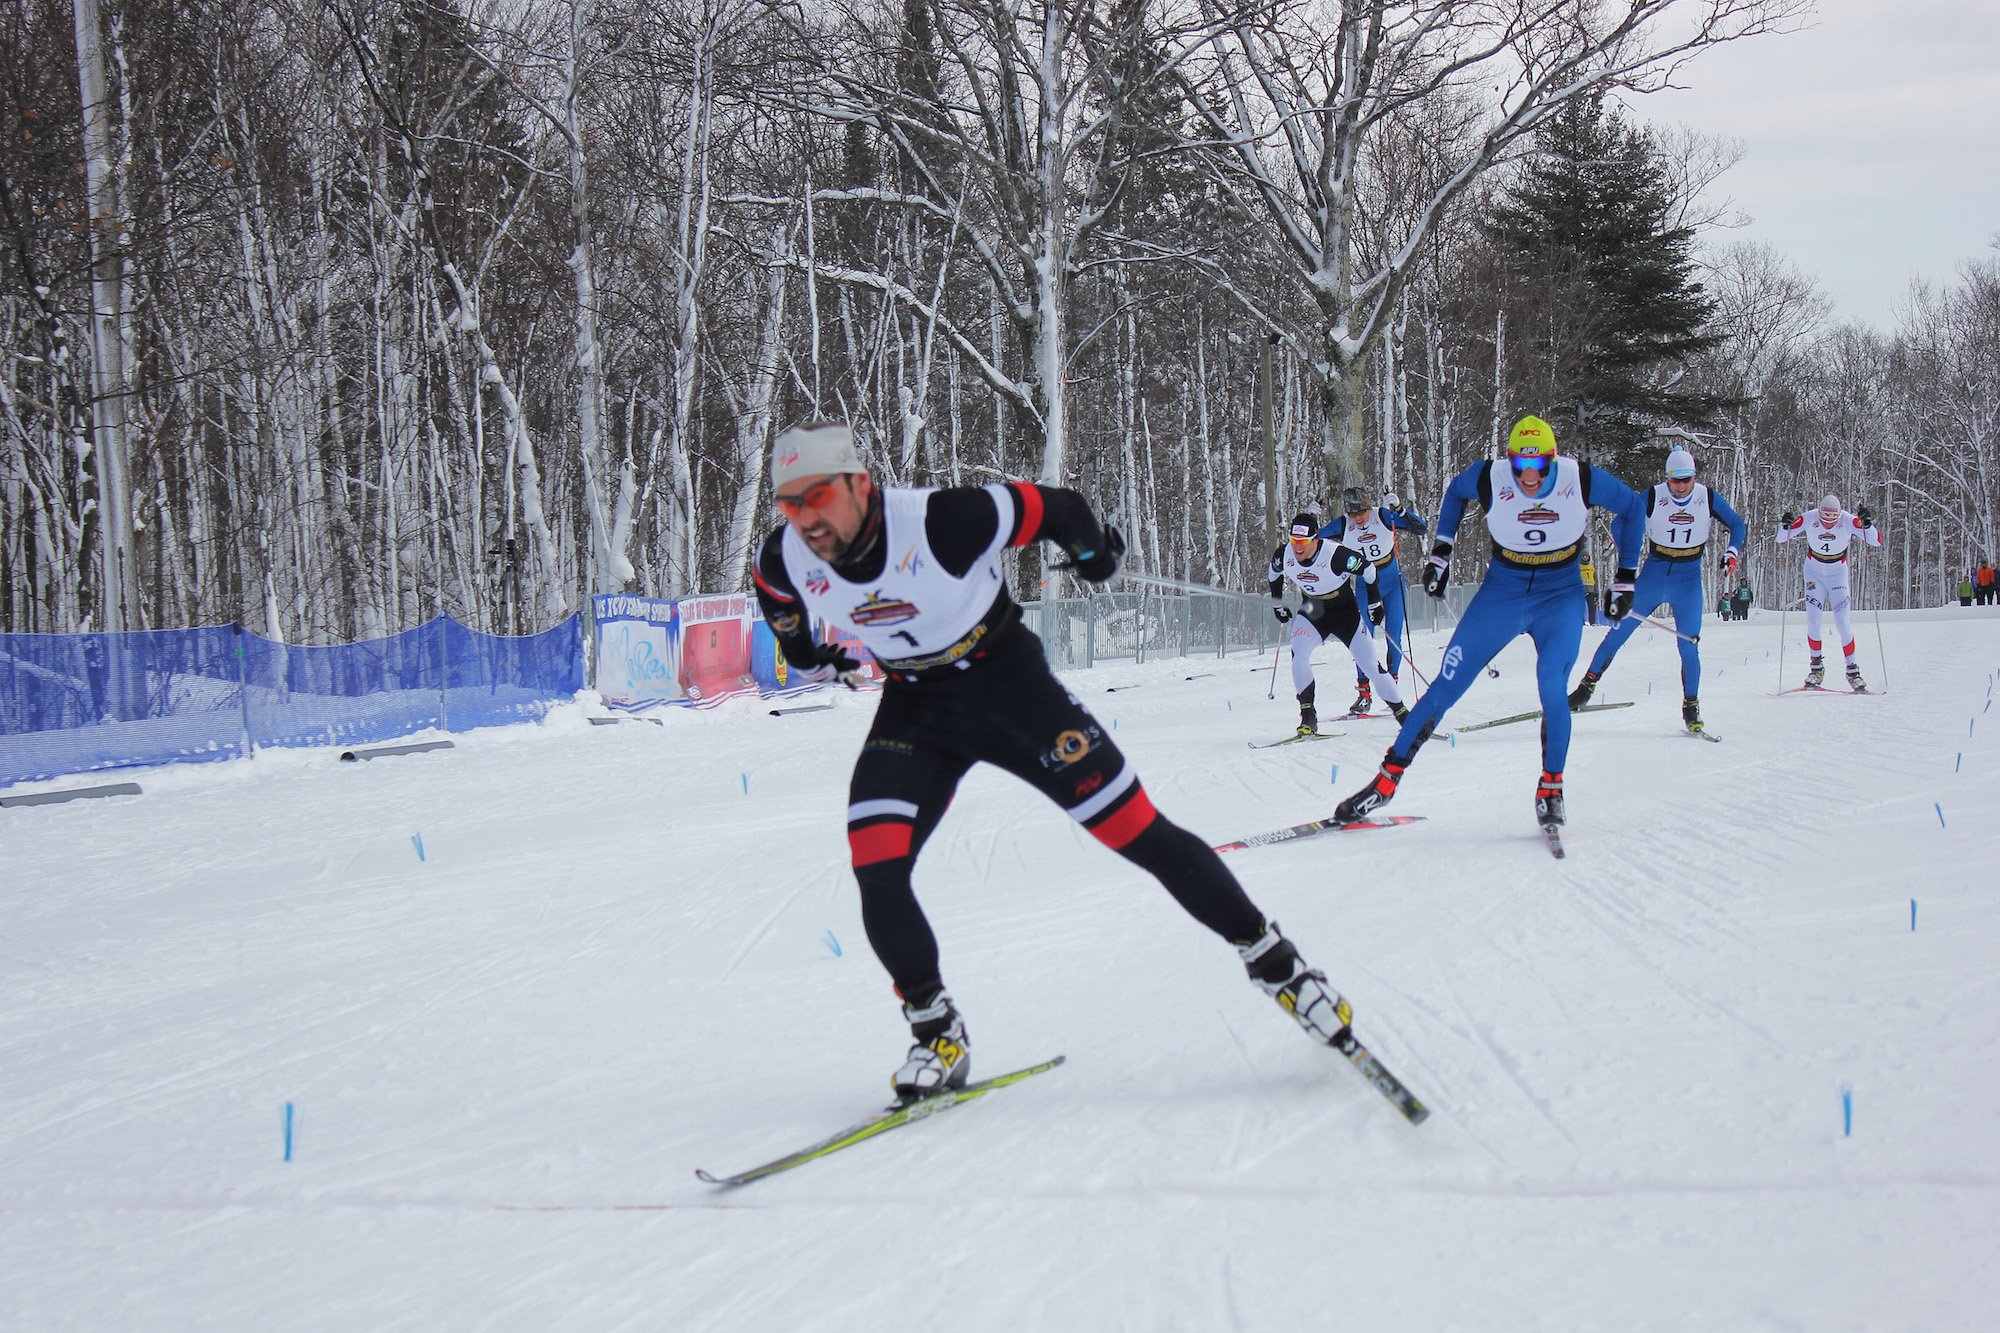 Dakota Blackhorse-von Jess of the Bend Endurance Academy earned his second national title of the week with a win in the 2015 U.S. Cross Country Championships 1.5 k freestyle sprint in Houghton, Mich. 